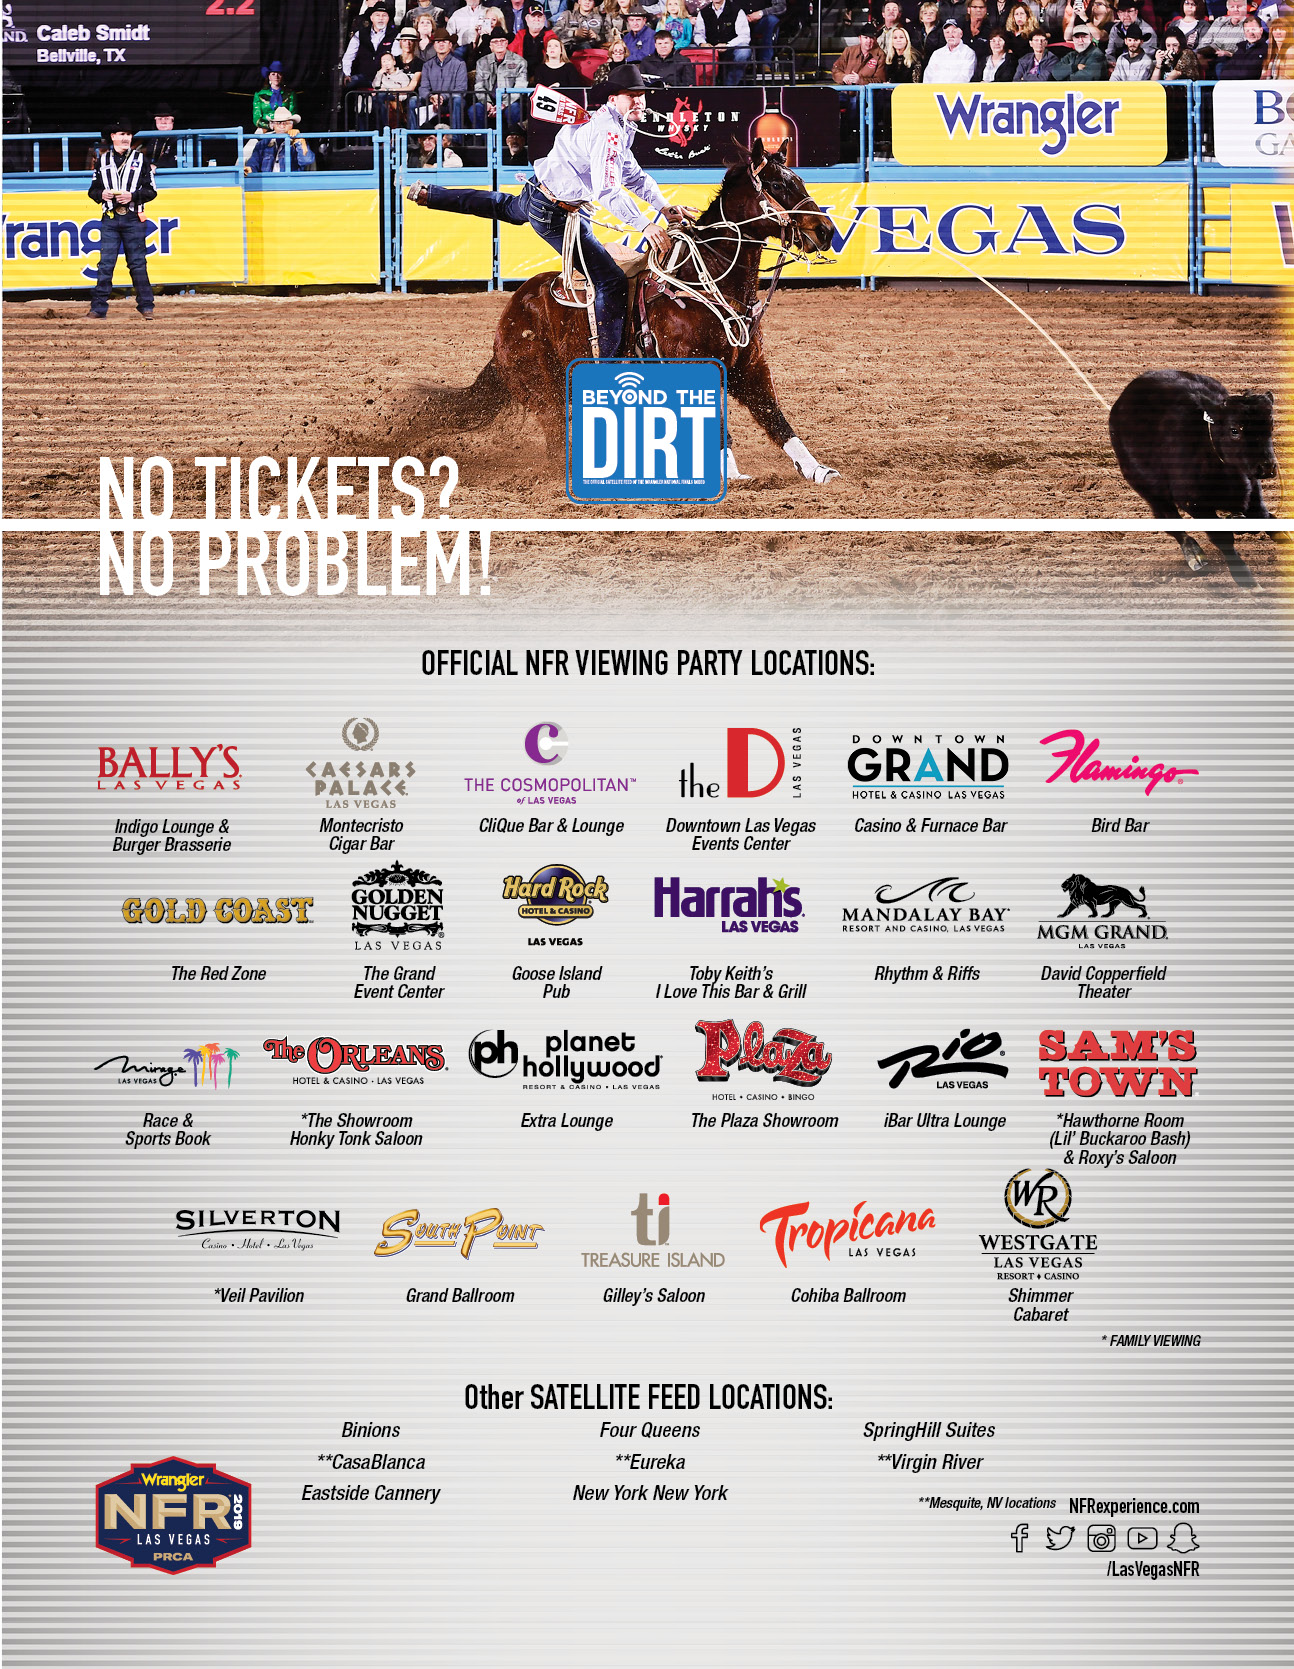 Beyond the Dirt The Official NFR Experience